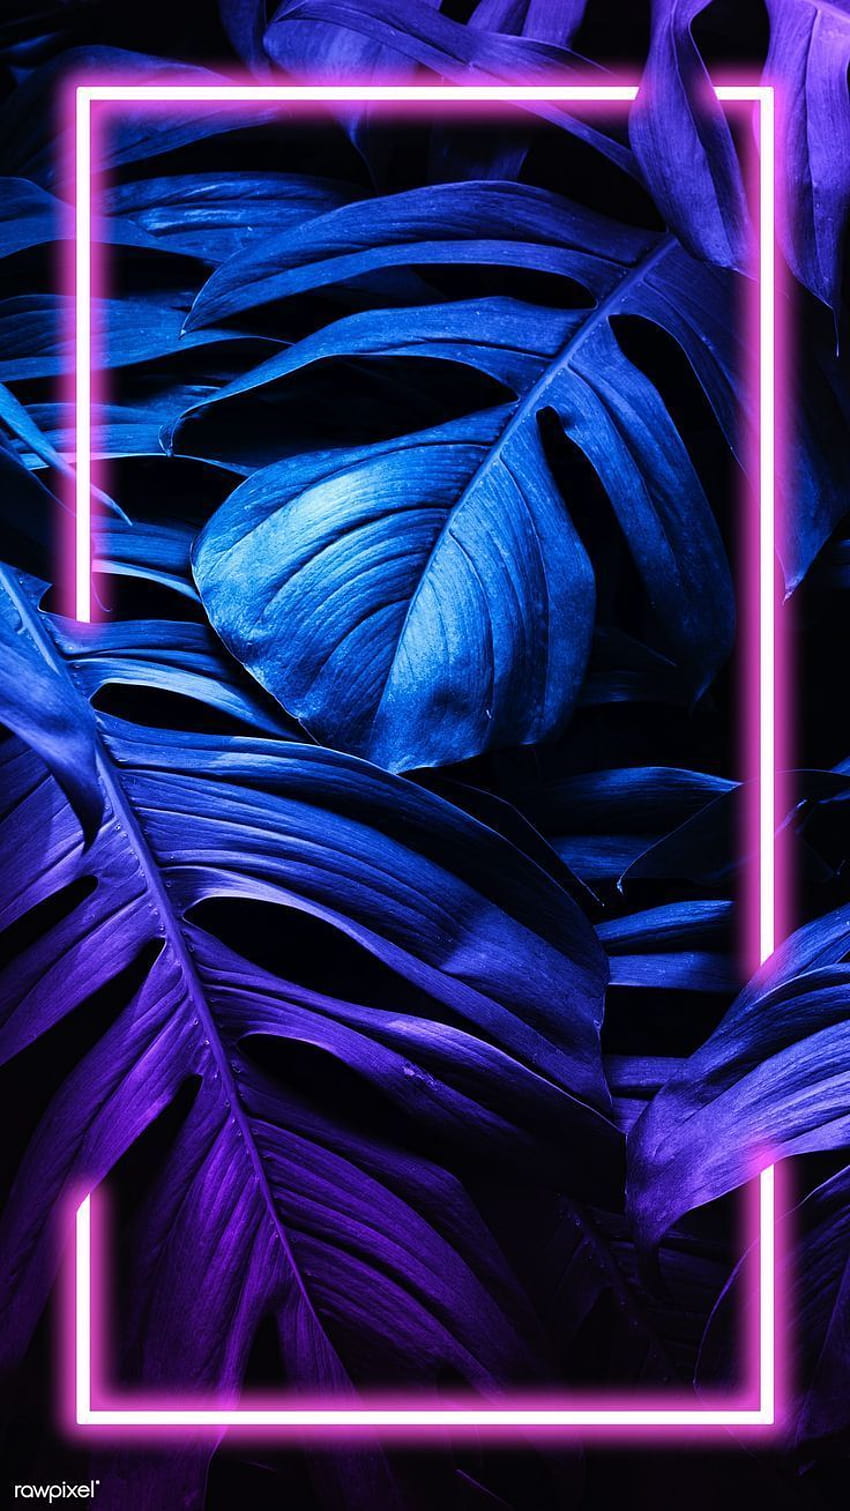 Blue, Purple, Light, Violet, Electric blue, Plant in 2020, purple plant tunnel aesthetic ultra HD phone wallpaper